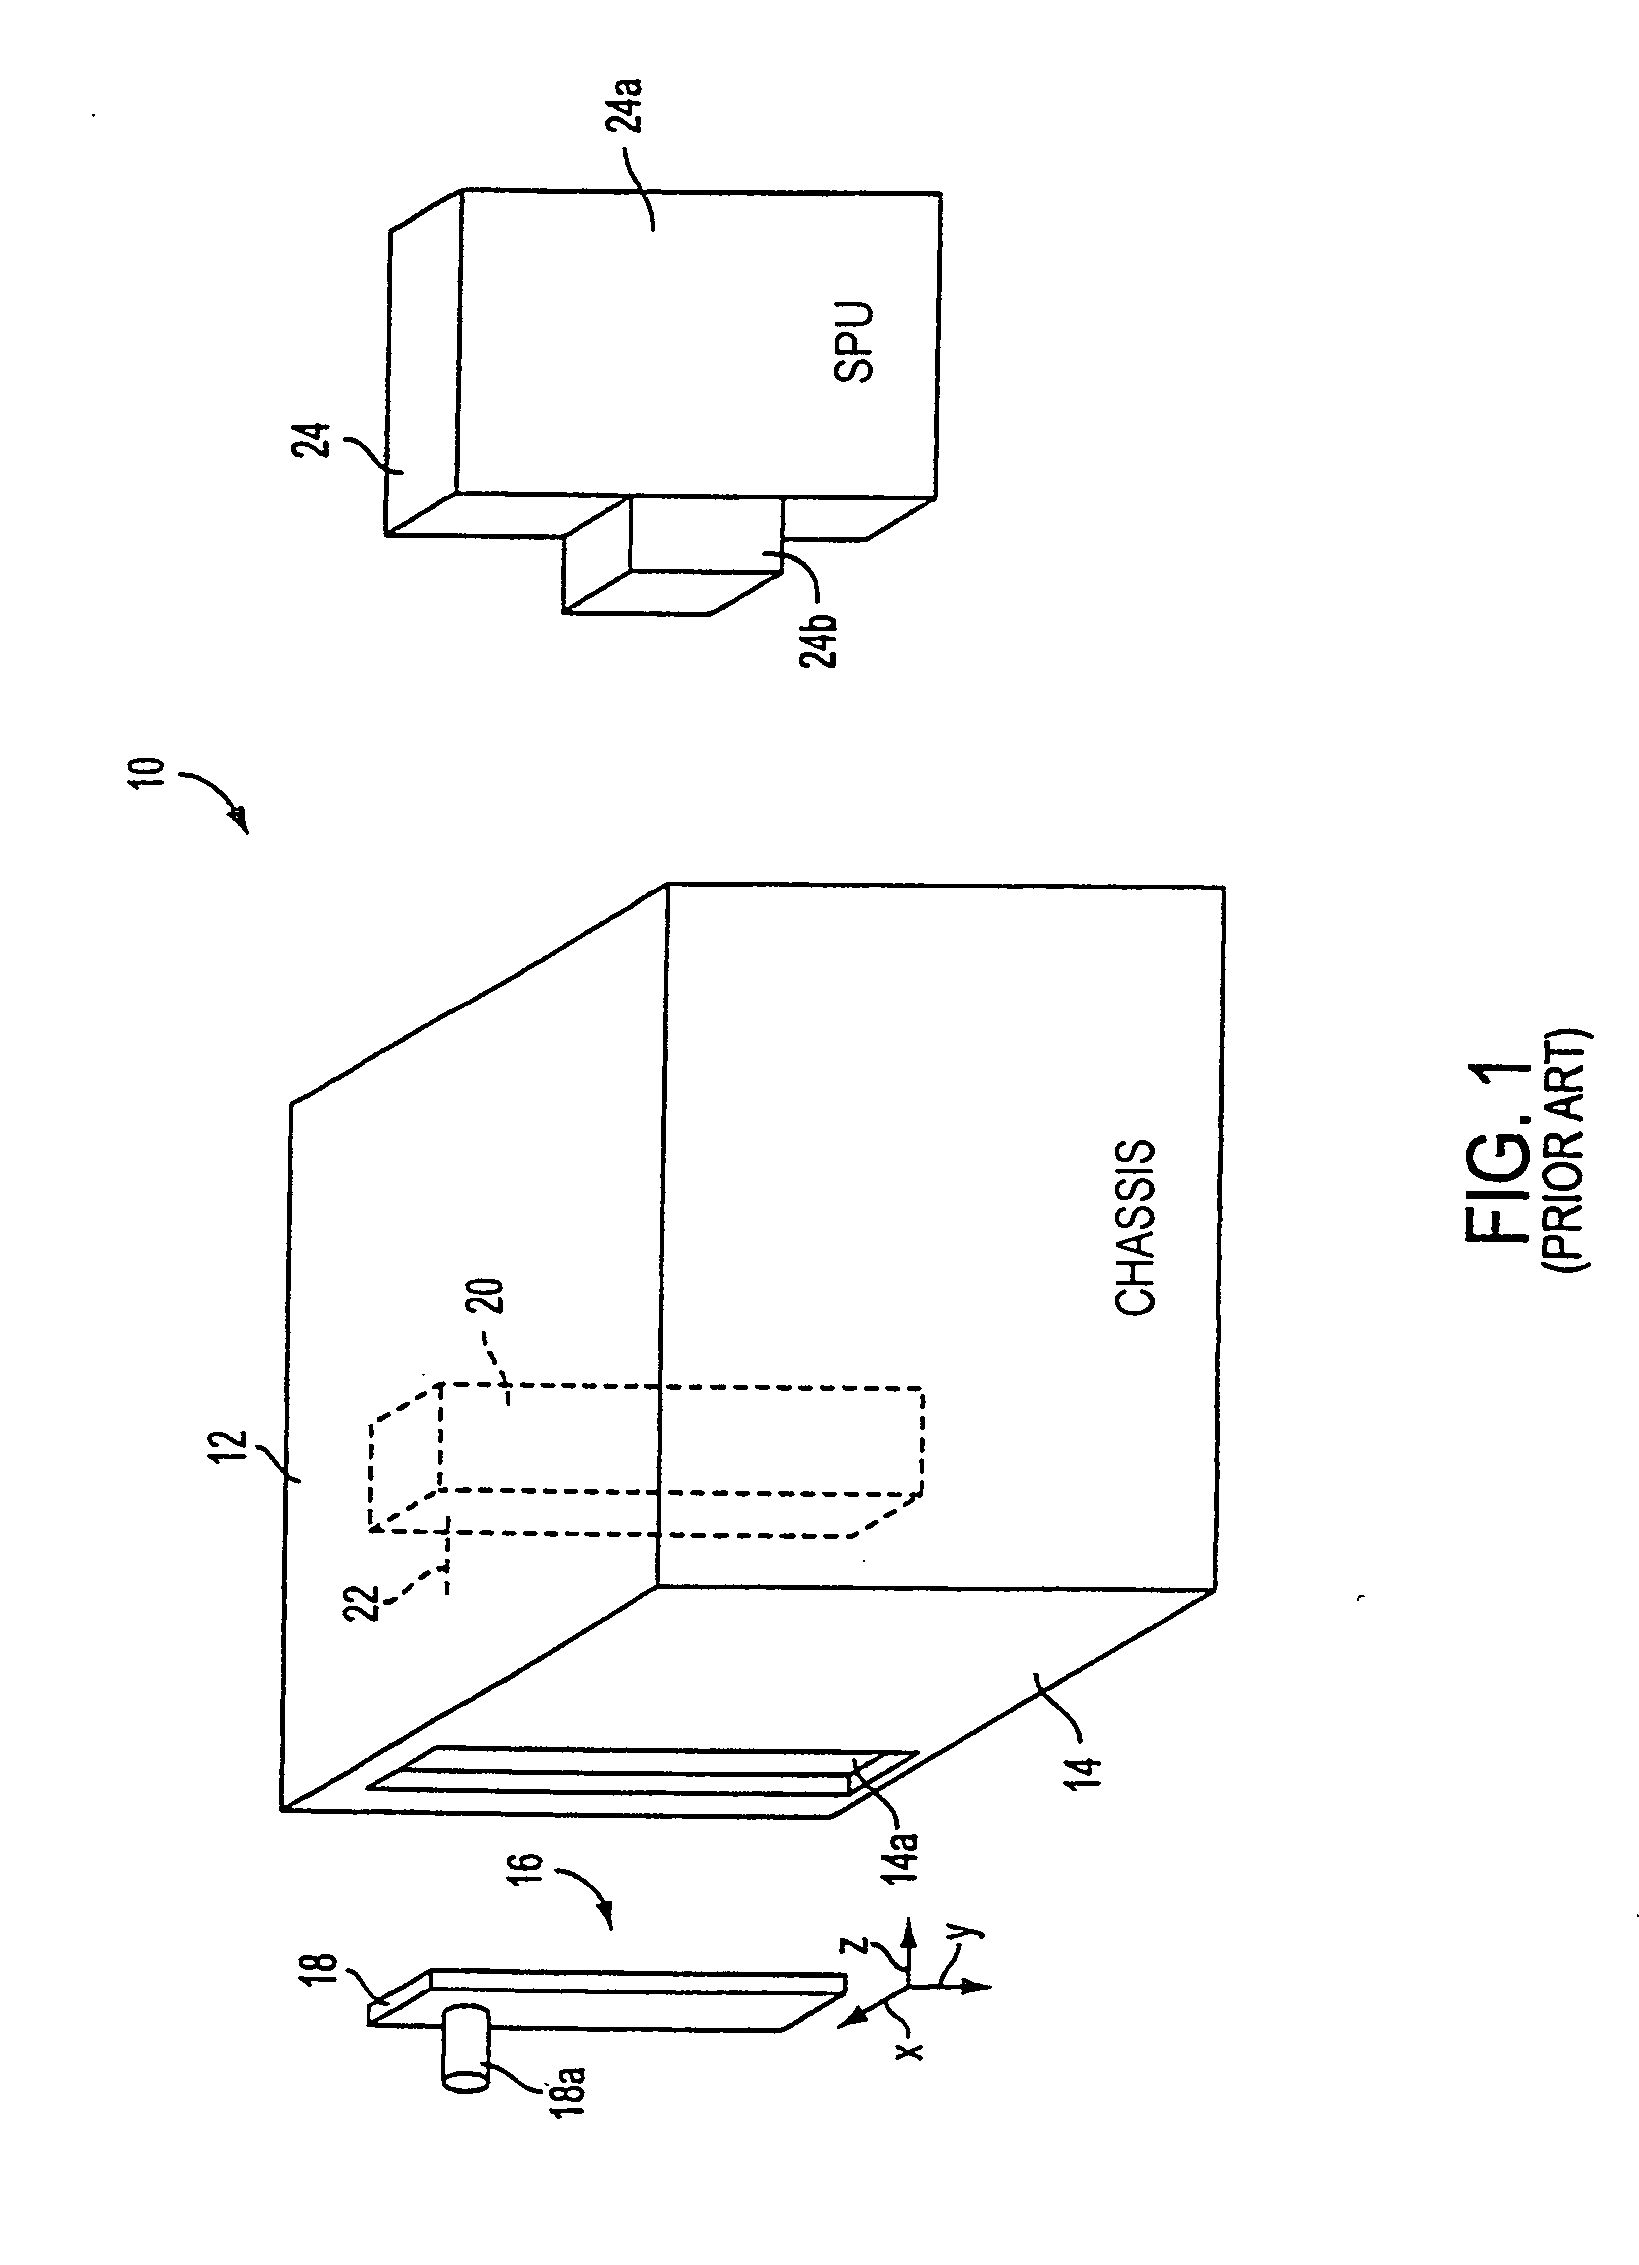 Universal mounting technique for video matrix switching with chassis volume reduction